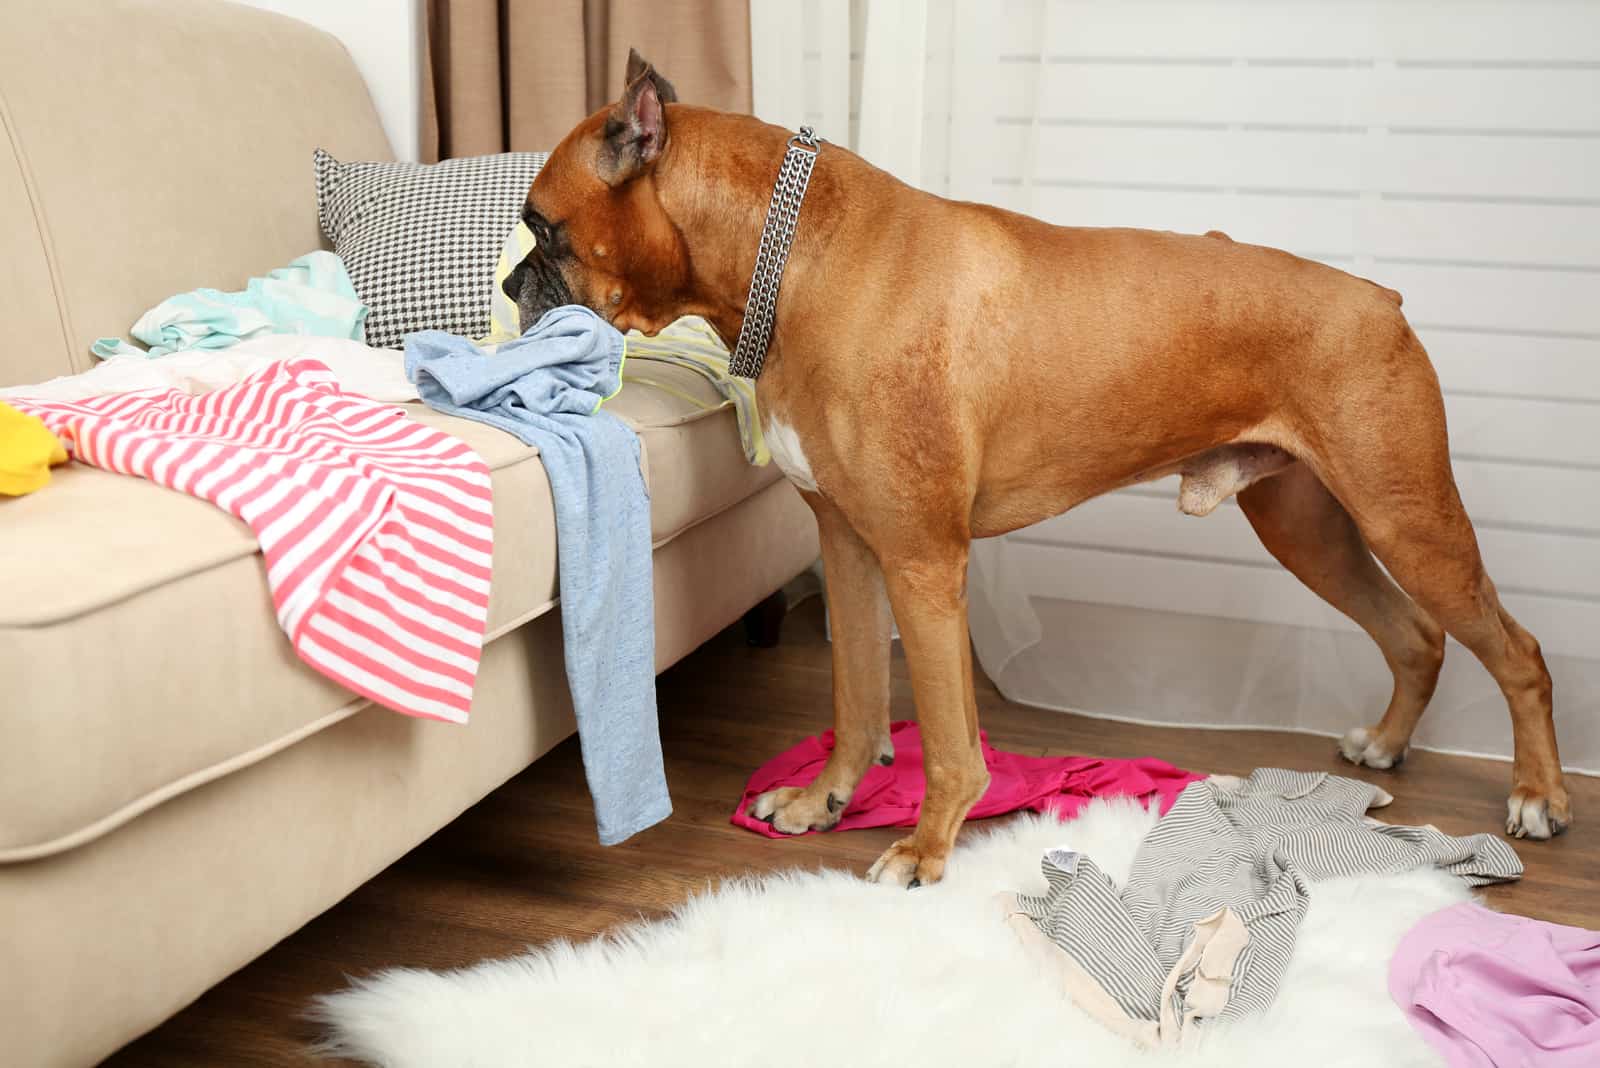 the dog nibbles on clothes